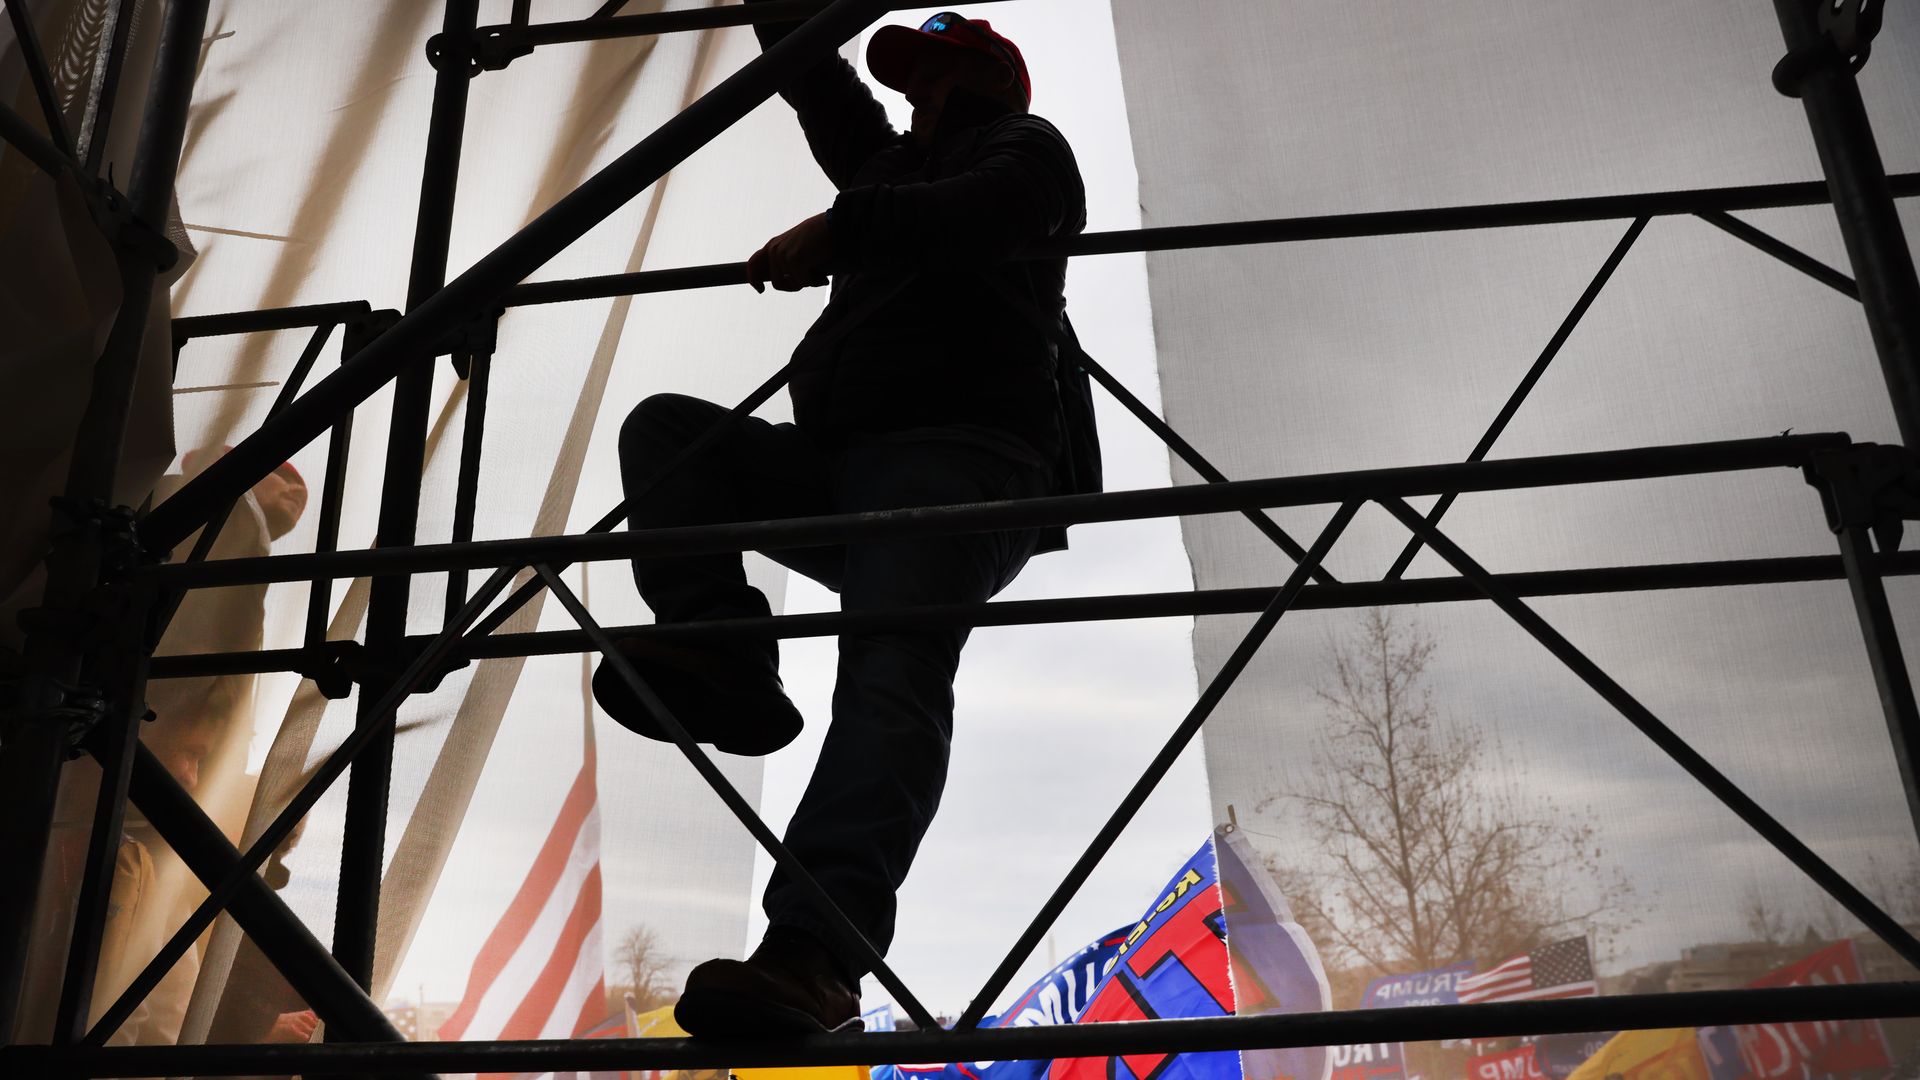 A protestor is seen scaling scaffolding outside the U.S. Capitol on Jan. 6, 2021.